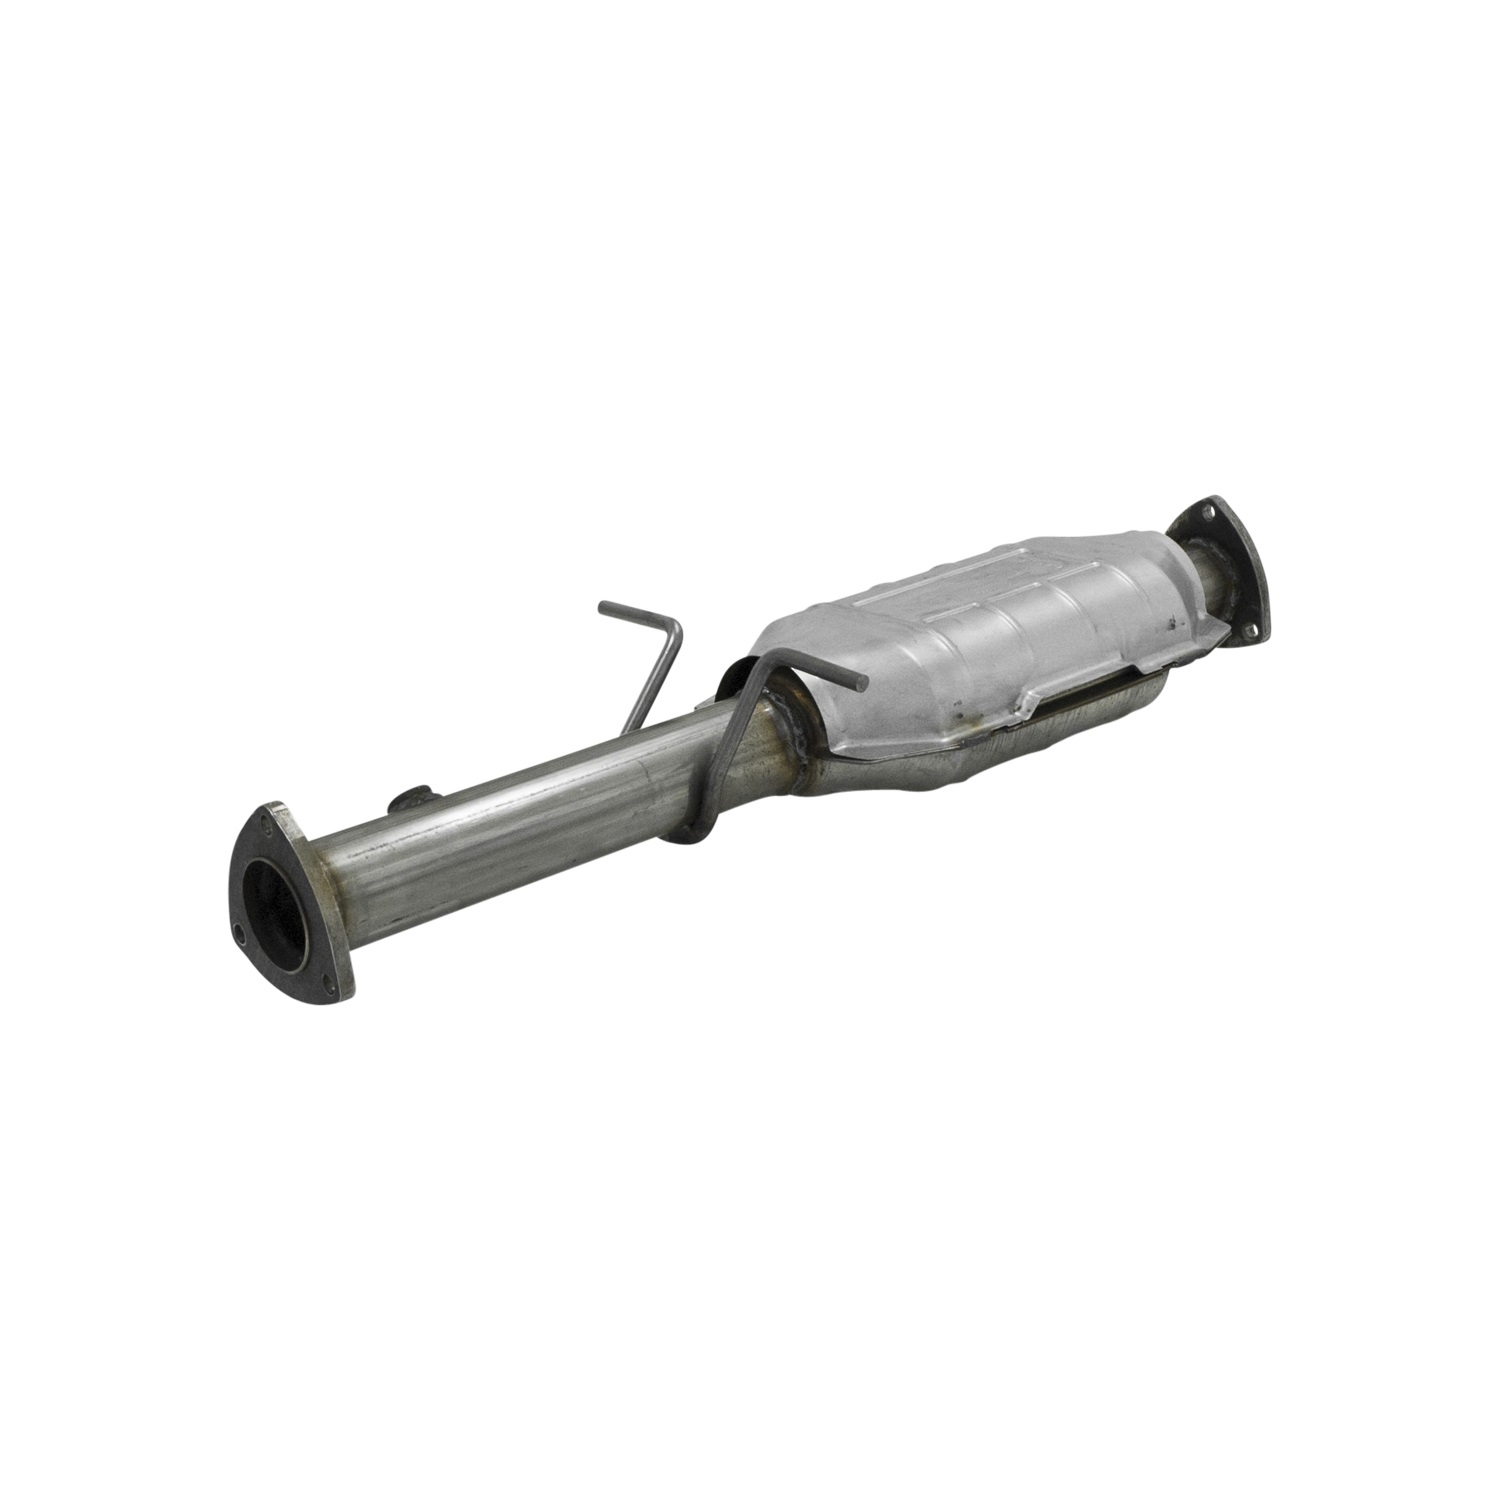 Flowmaster Flowmaster 2010016 Direct Fit Catalytic Converter Fits Hombre S10 Pickup Sonoma